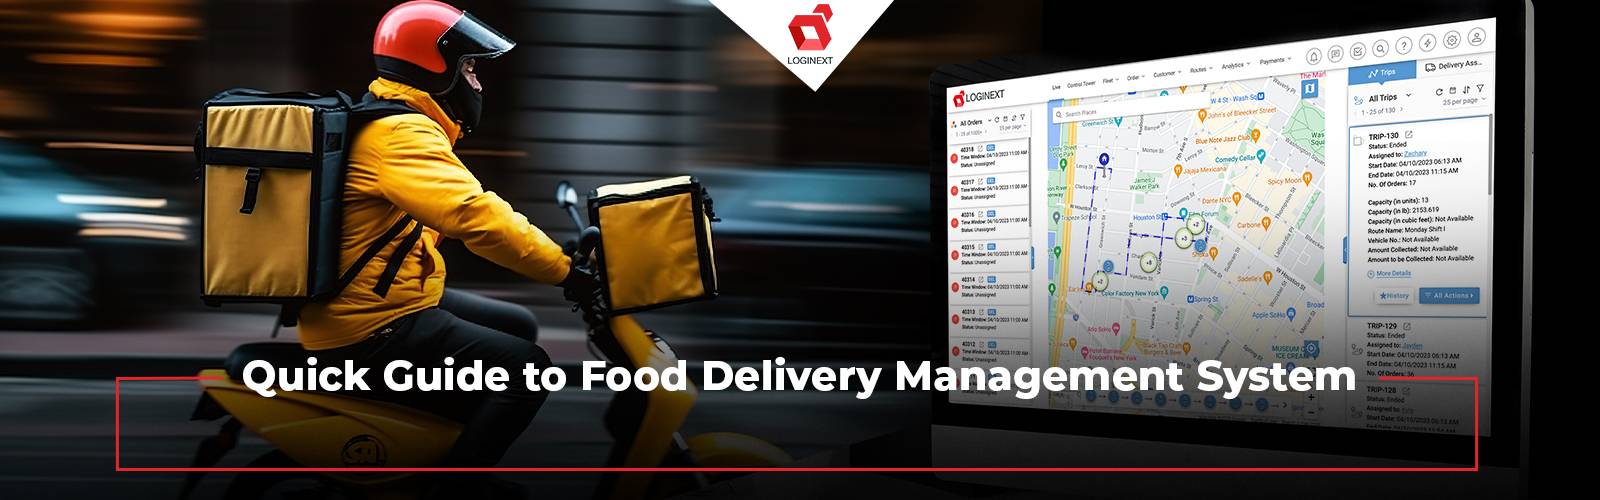 White Paper: Quick Guide to Food Delivery Management System